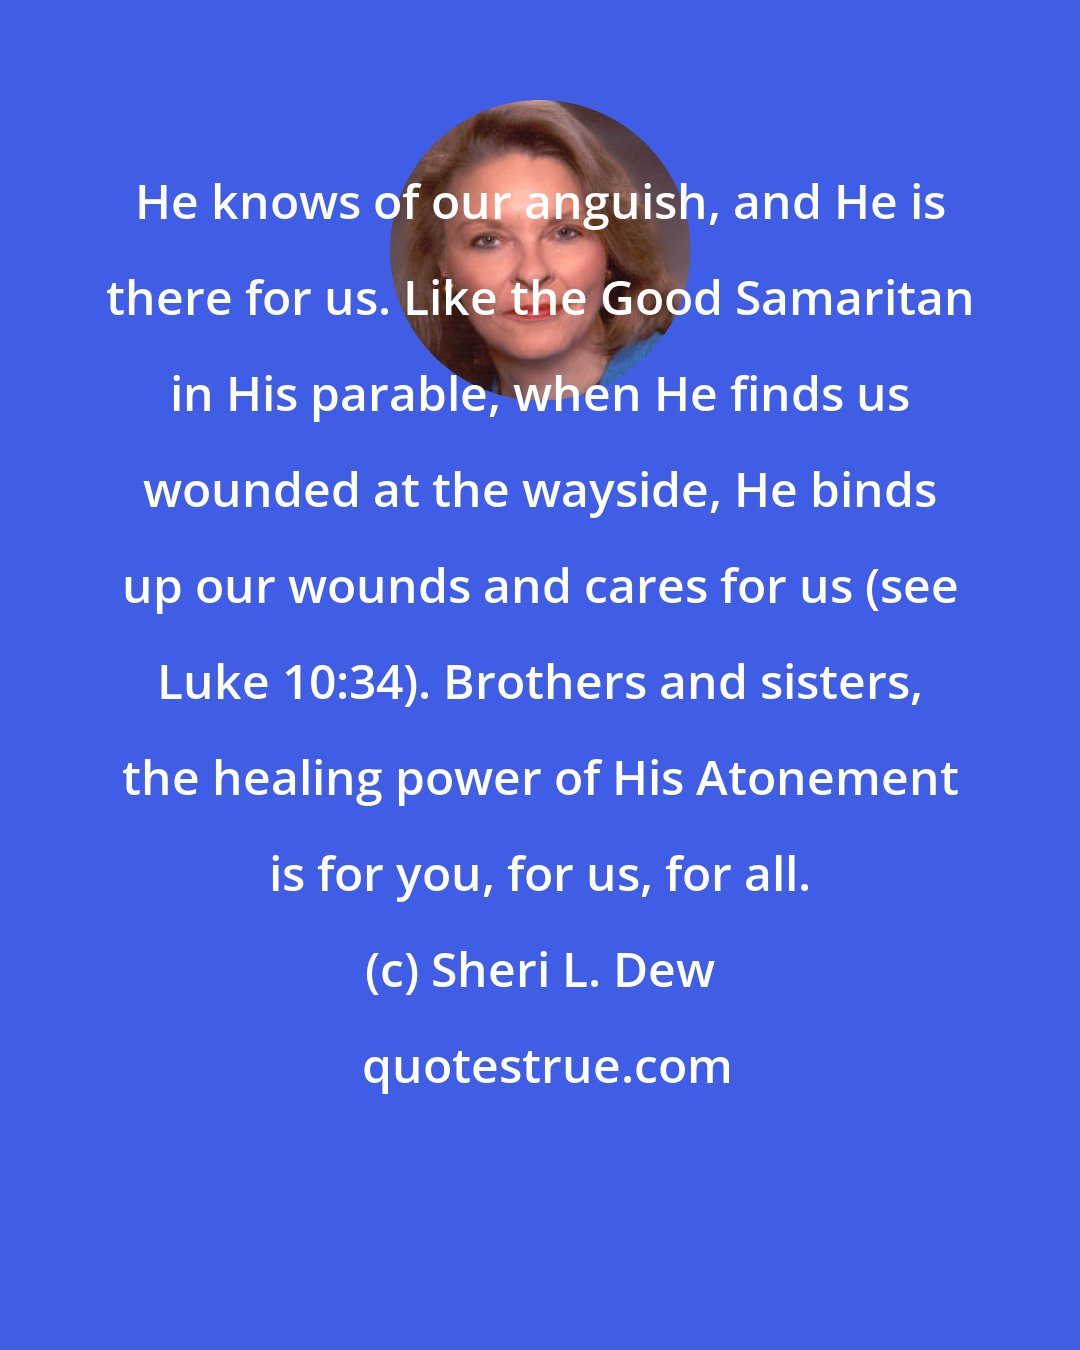 Sheri L. Dew: He knows of our anguish, and He is there for us. Like the Good Samaritan in His parable, when He finds us wounded at the wayside, He binds up our wounds and cares for us (see Luke 10:34). Brothers and sisters, the healing power of His Atonement is for you, for us, for all.